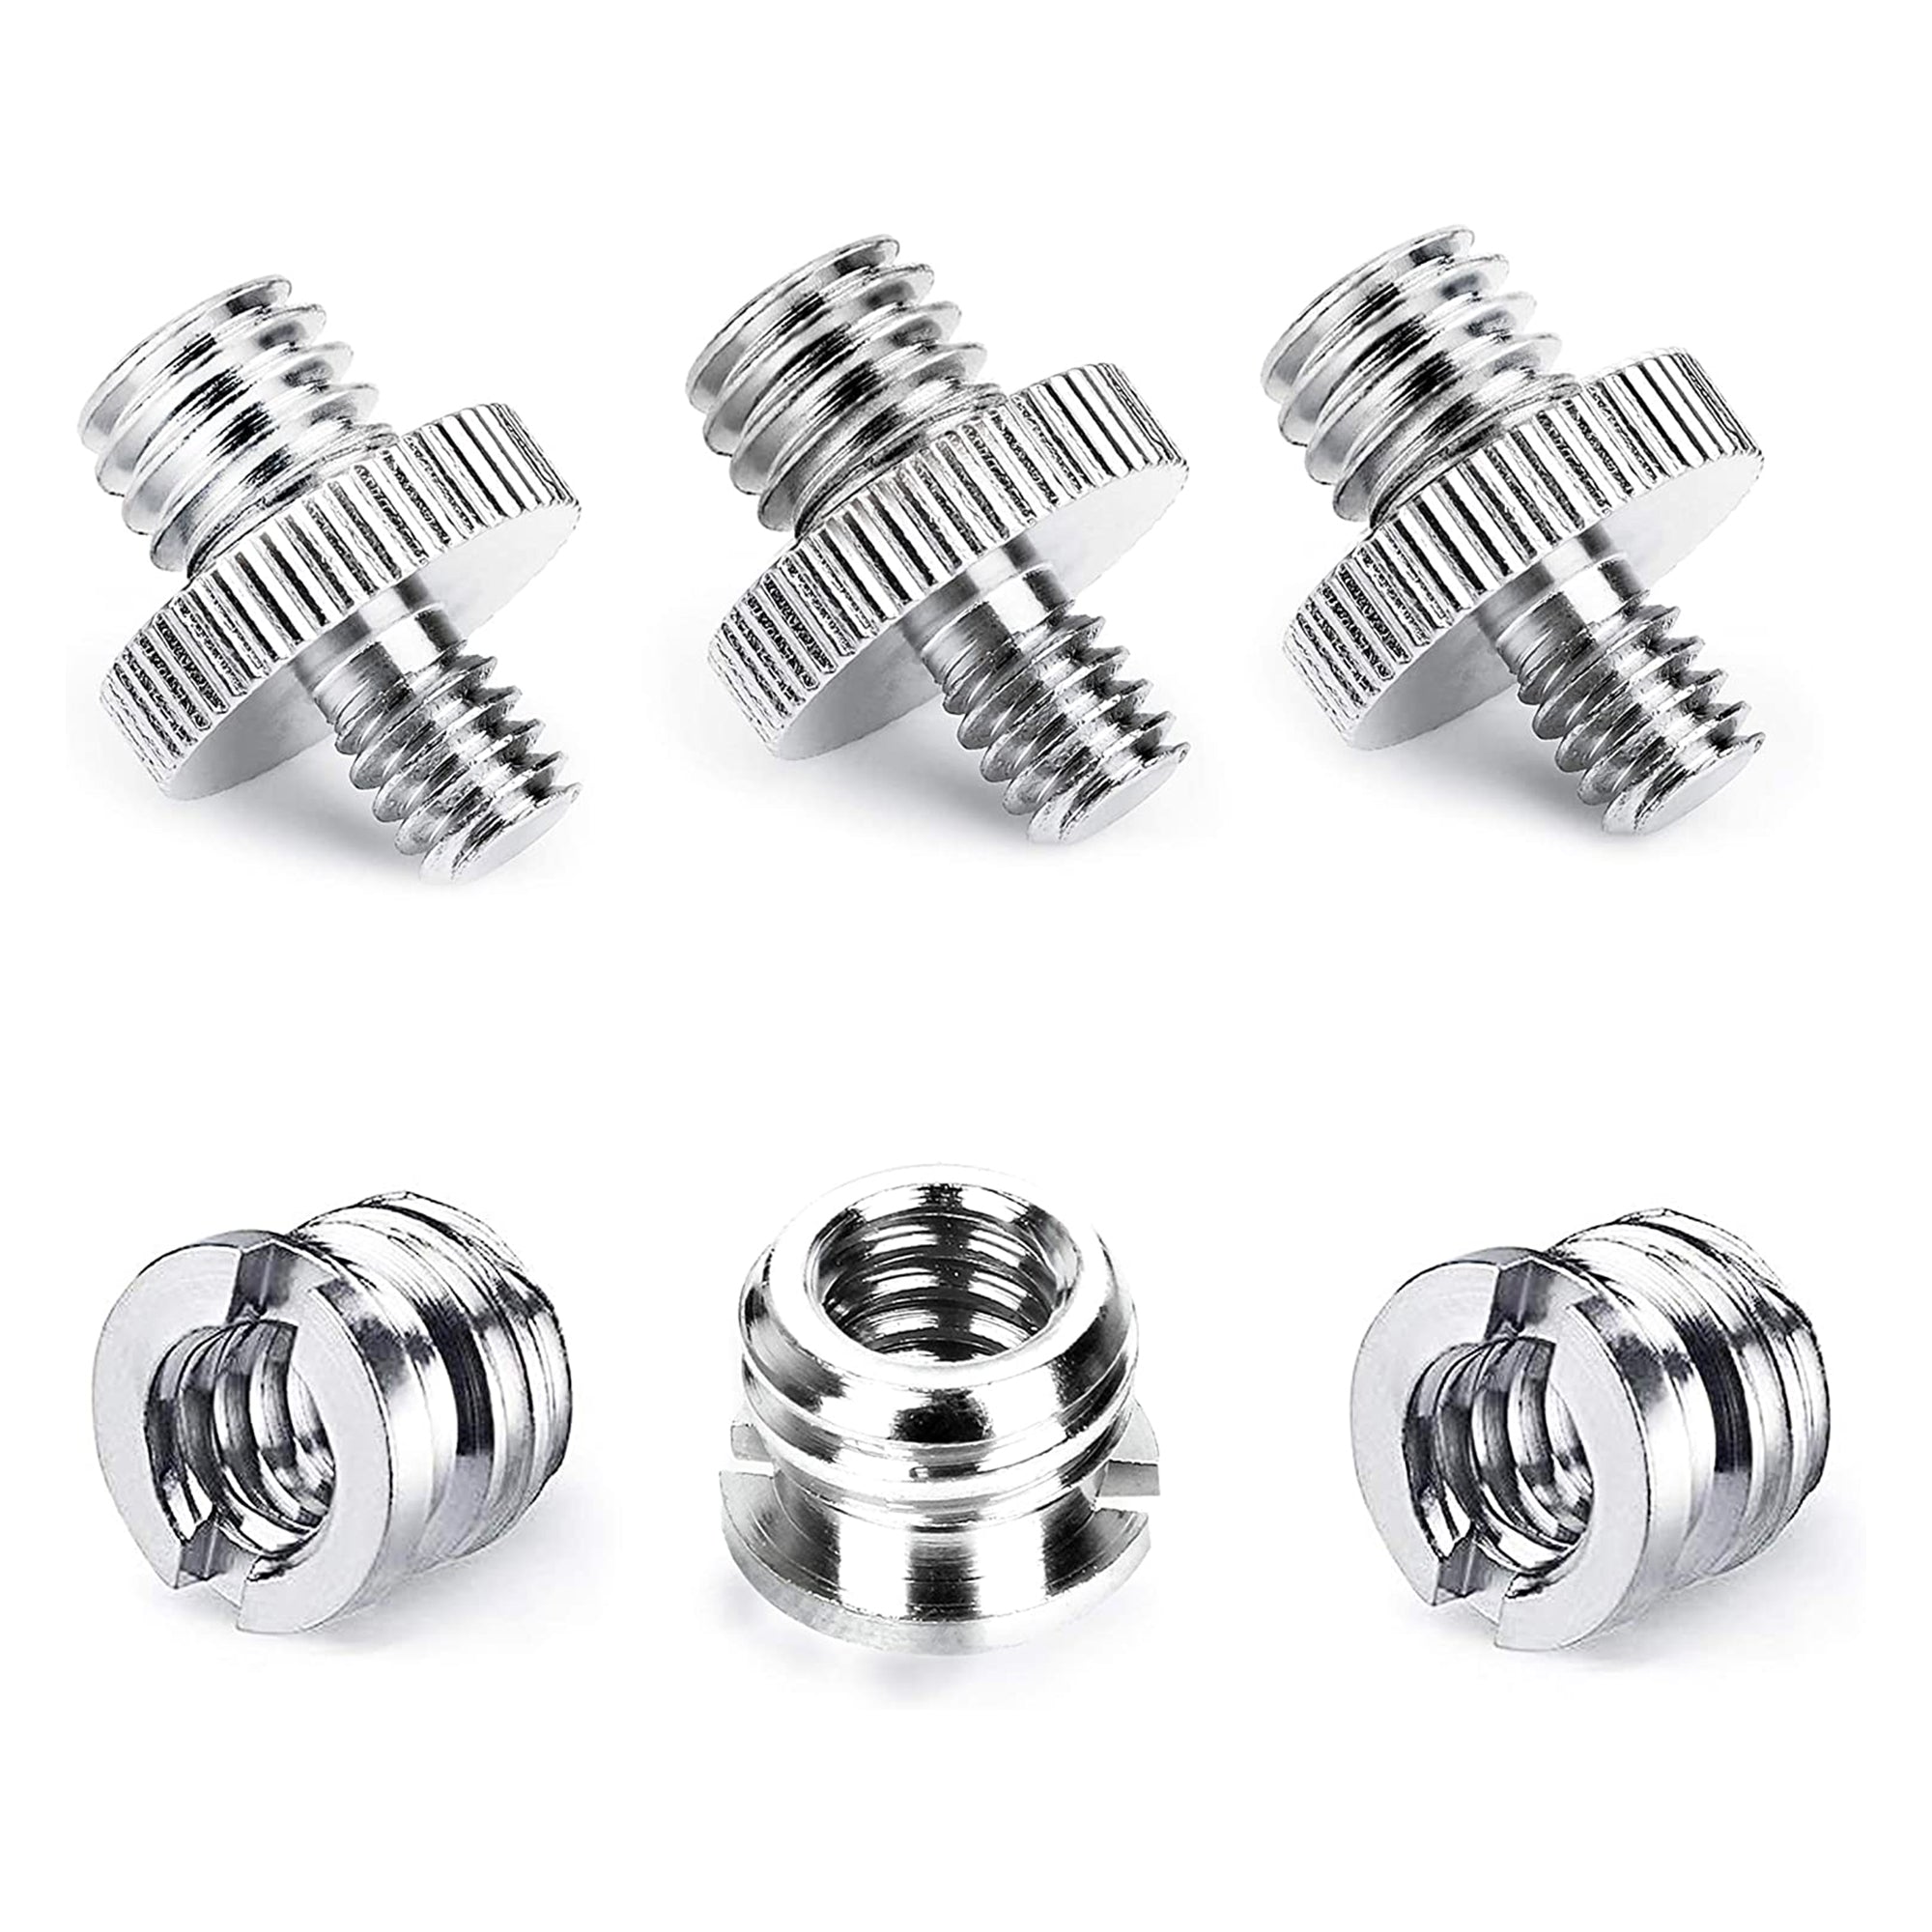 5 Core 3/8 to 1/4 adapter Tripod Screw Adapter 5 Pieces Double Sides Standard Mounting Thread Converter for Camera Mount -1/4M-3/8M Camera Screw 5Pcs